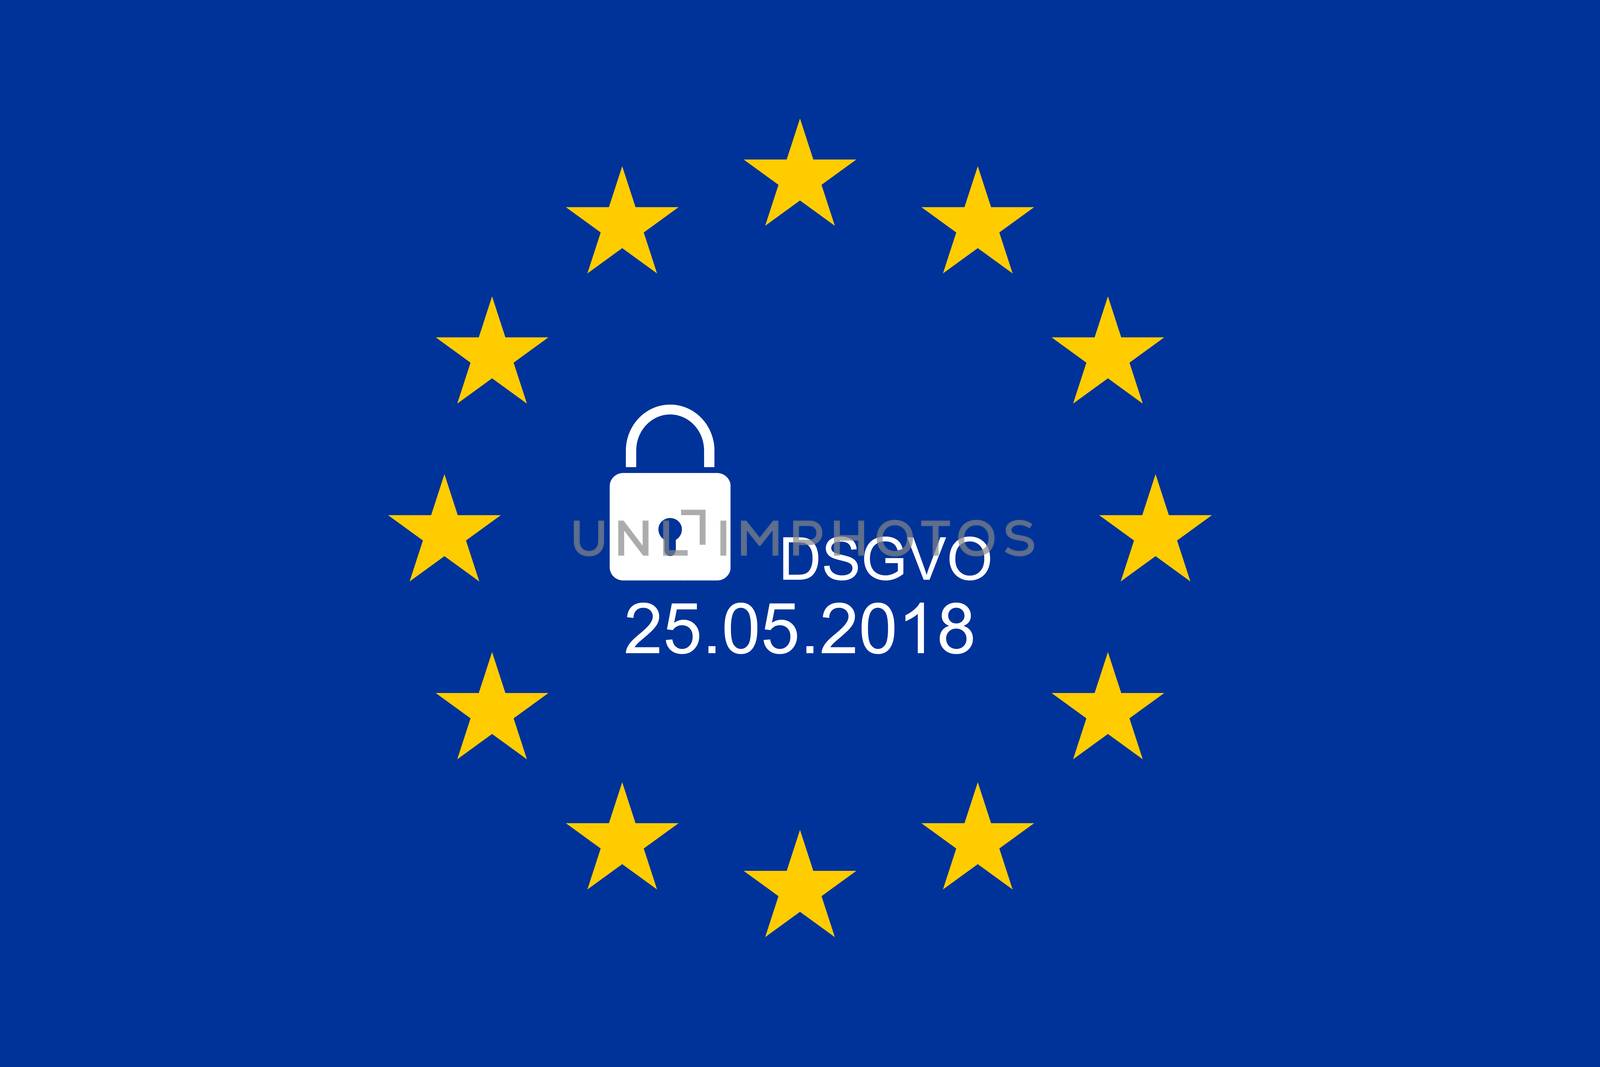 European flag with text DSGVO and 25.05.2018